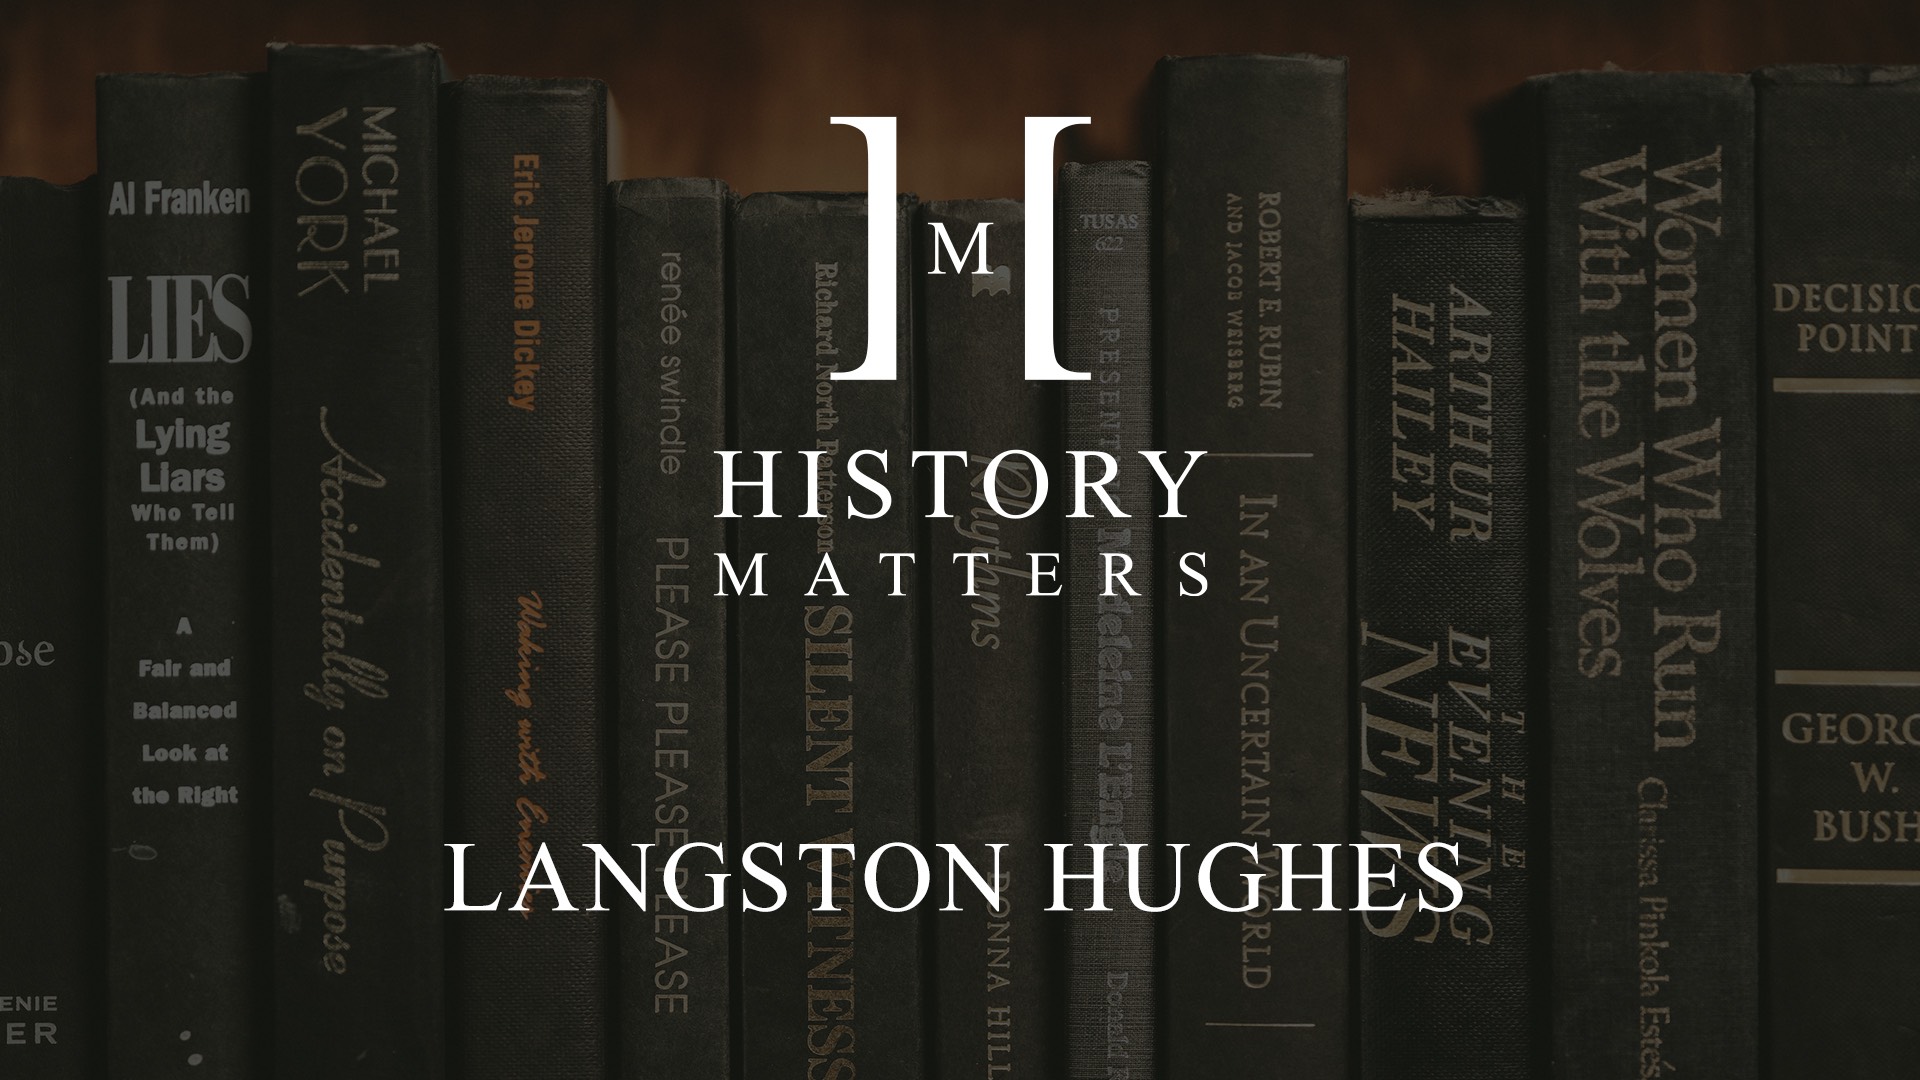 White HM Langston Hughes logo with dimmed background of a row of books on a shelf